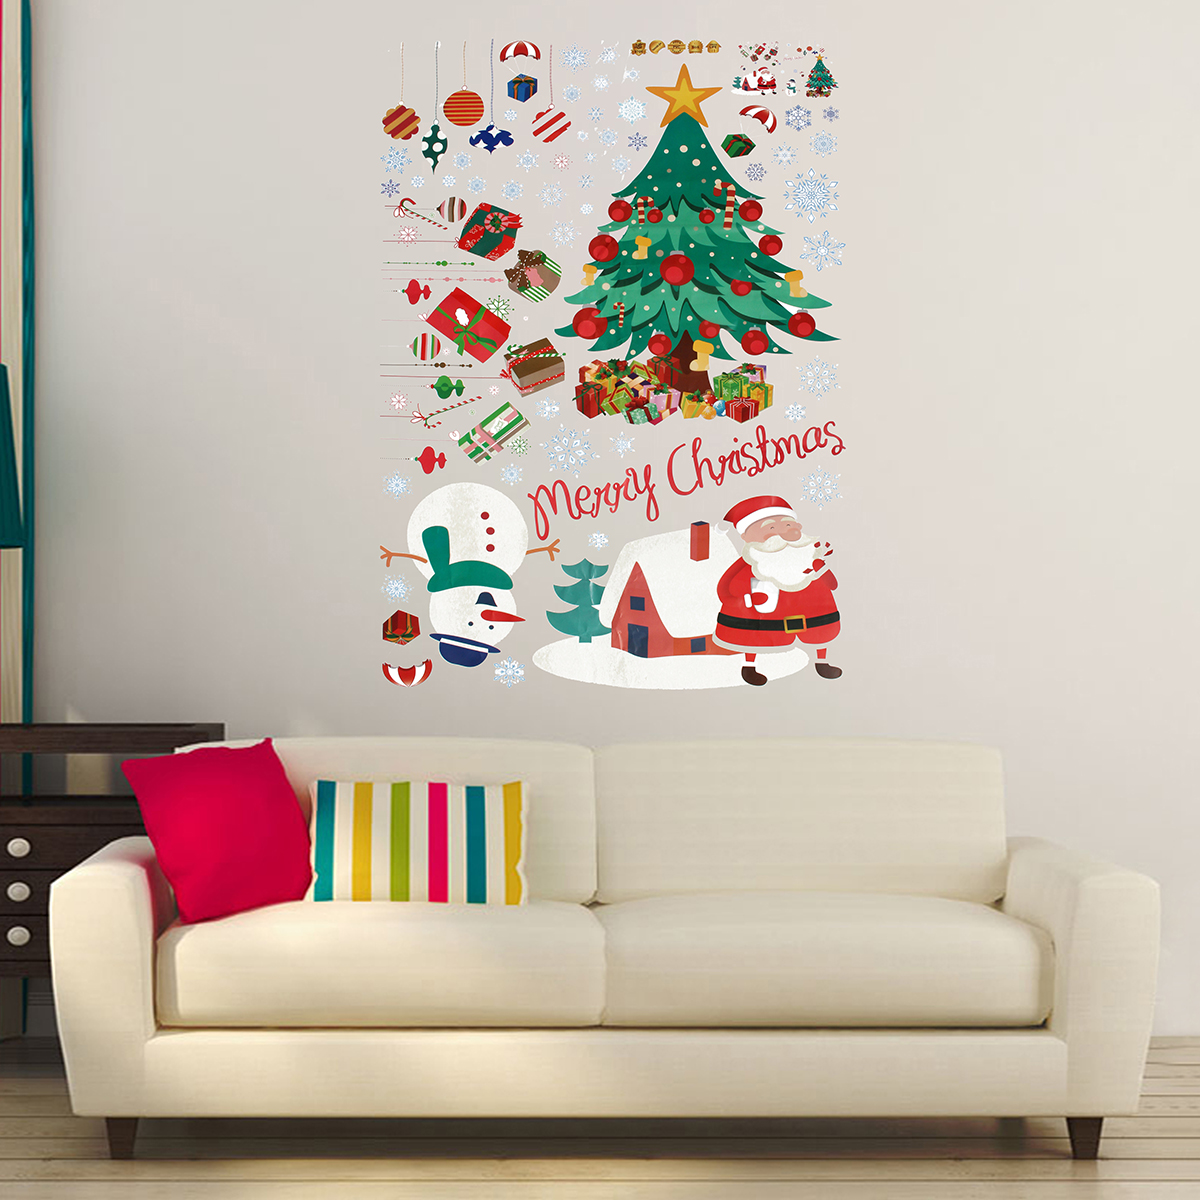 Removable-Christmas-Santa-Snowman-Wall-Stickers-Window-Decal-Home-Decor-1097319-6